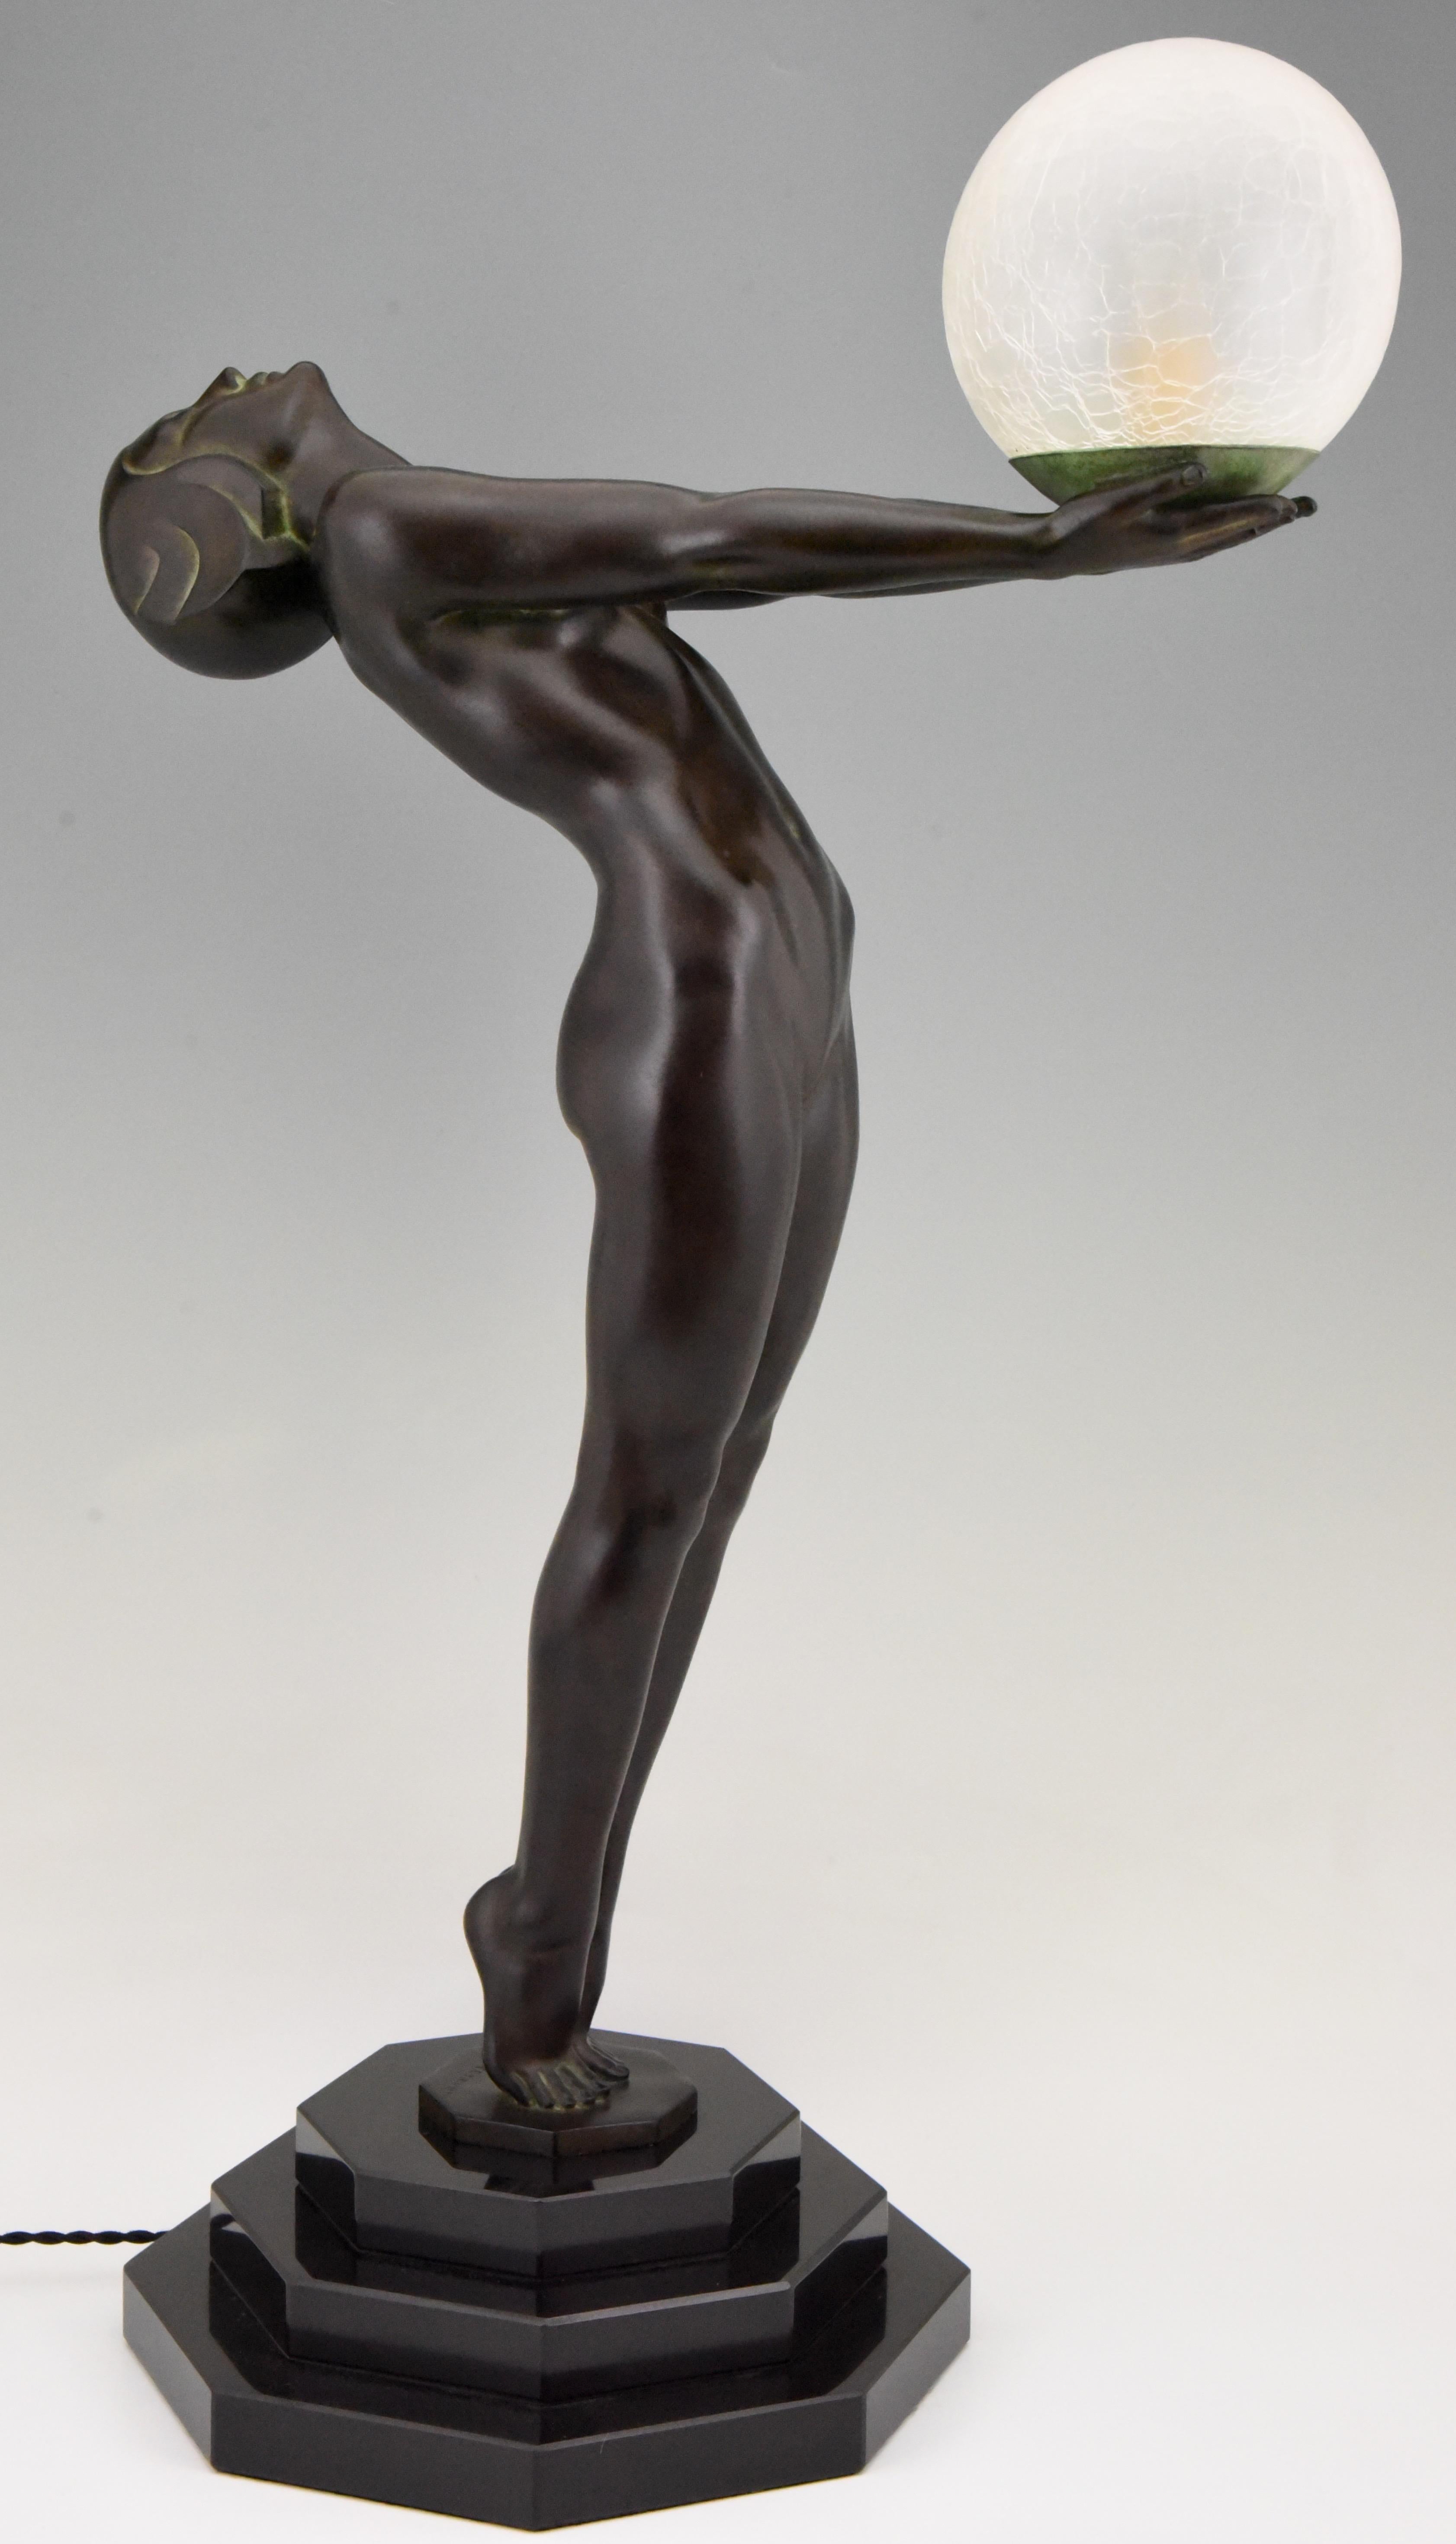 French Art Deco style Lamp Clarté Nude with Globe by Max Le Verrier H. 33 inch / 84 cm